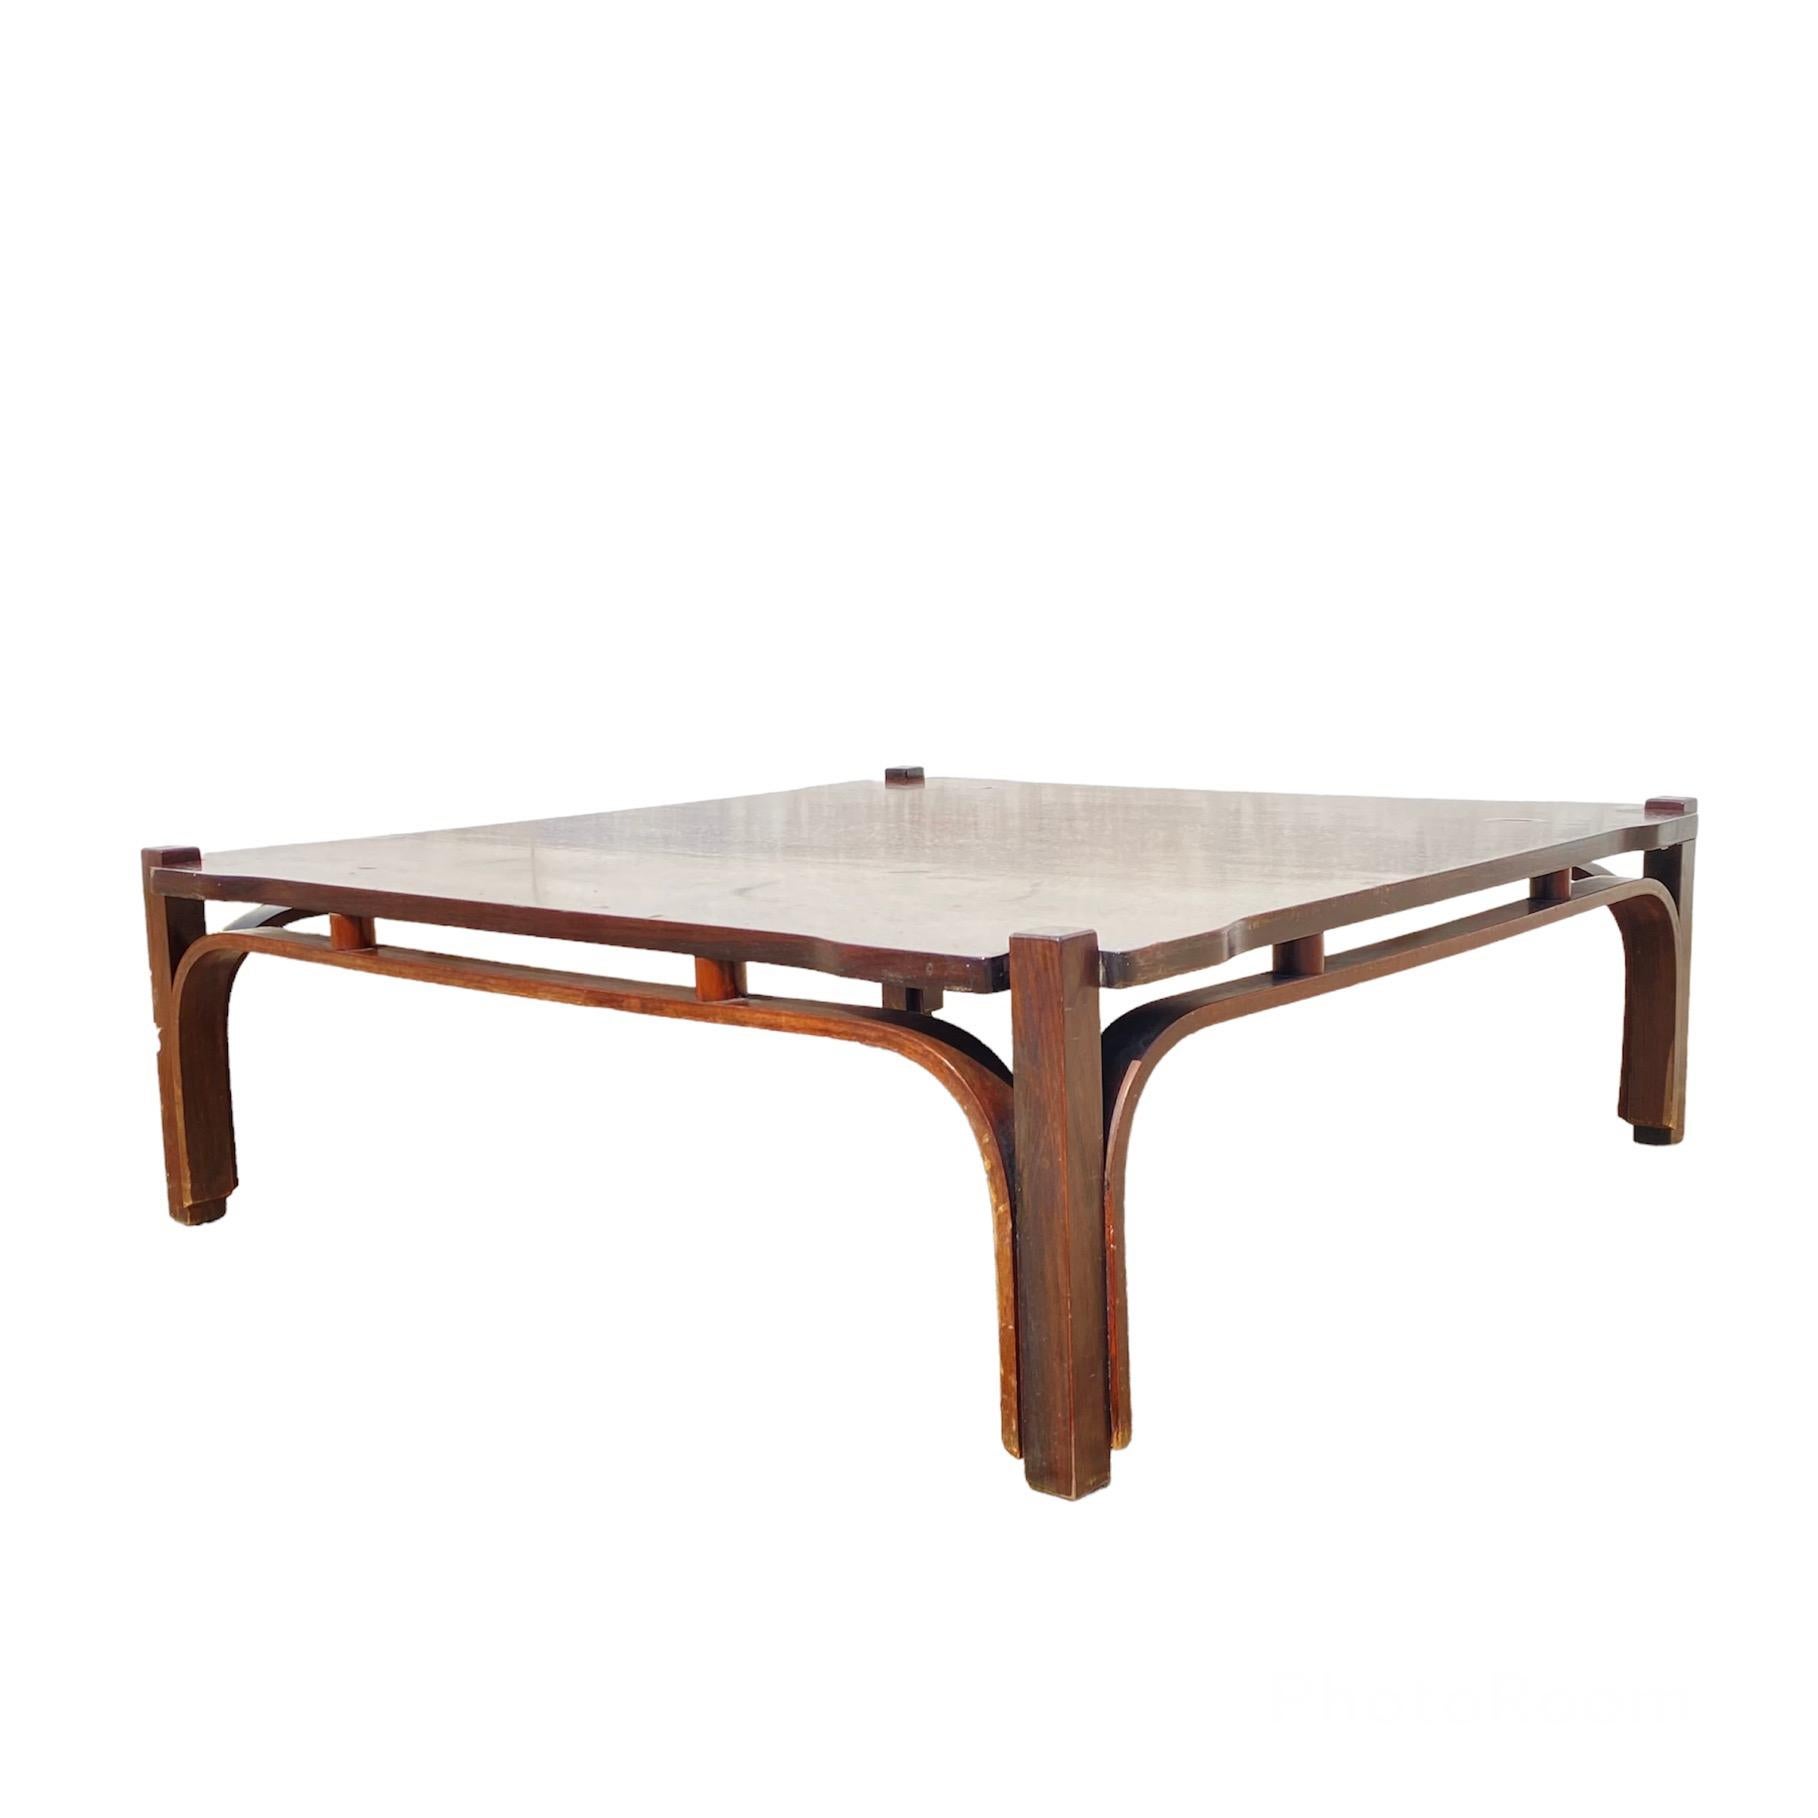 Vintage Low Table in Walnut designed Tito Agnoli for Cinova, Italy, 1964.
 
The table is in good structure conditions, please note that it could have some signs of age and use.
 
Dimensions:
H: 27cm
L: 123cm
D: 84cm